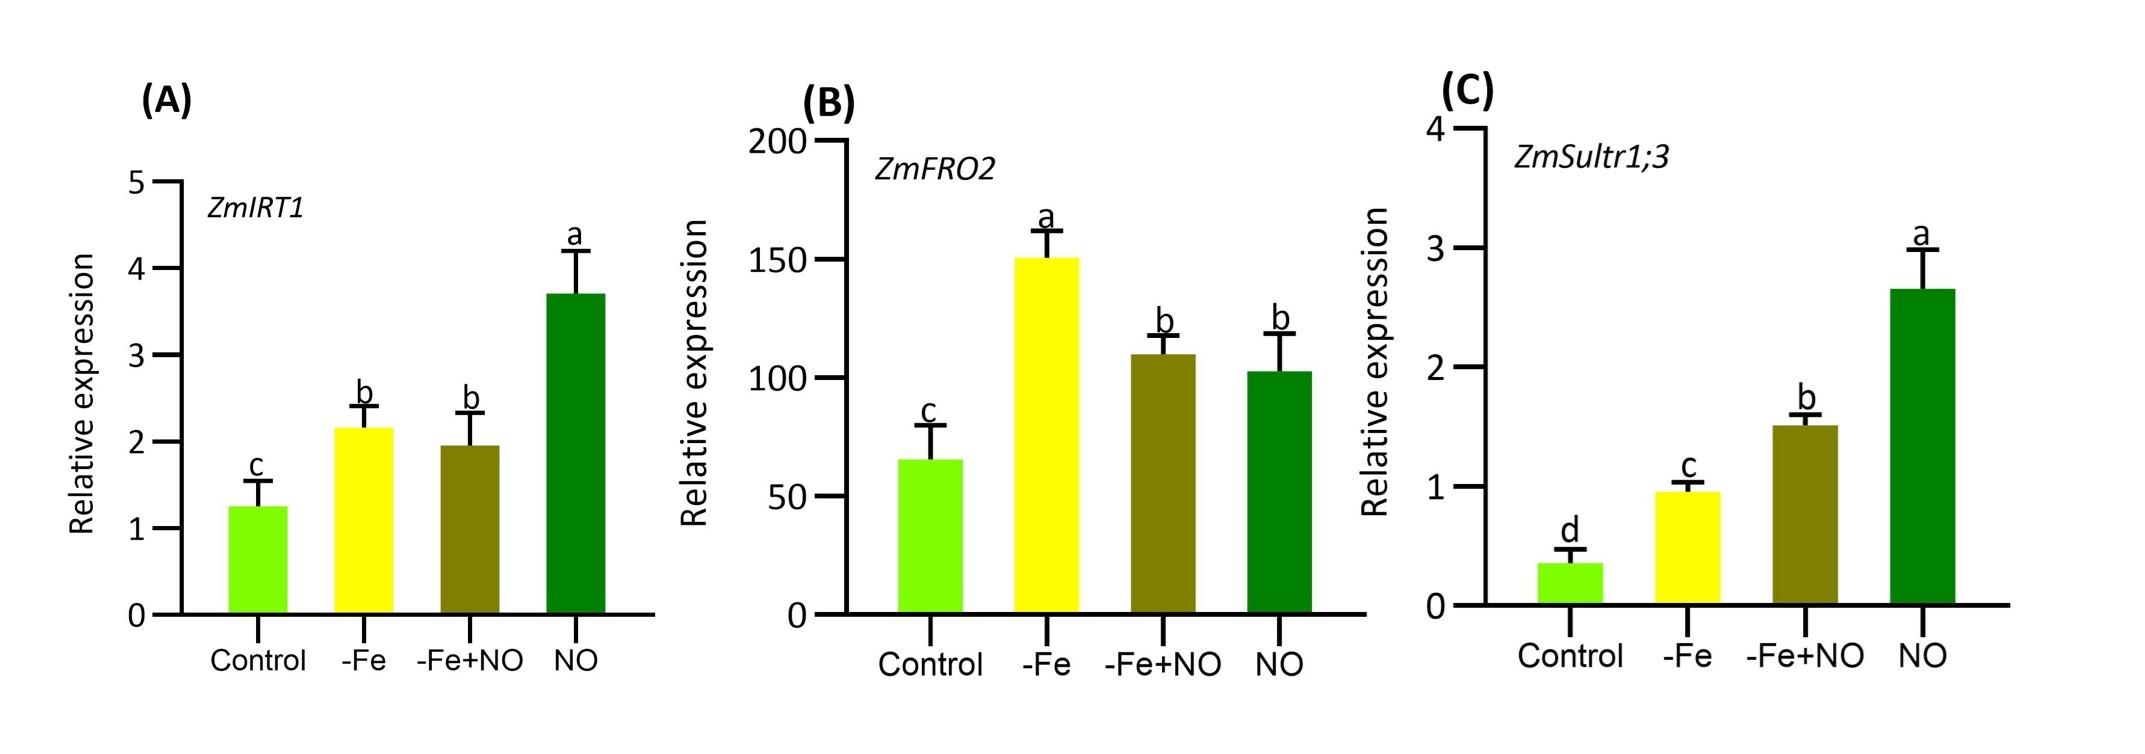 Nitric oxide facilitates the activation of iron acquisition genes in soybean (<span>Glycine max</span> L.) exposed to iron deficiency